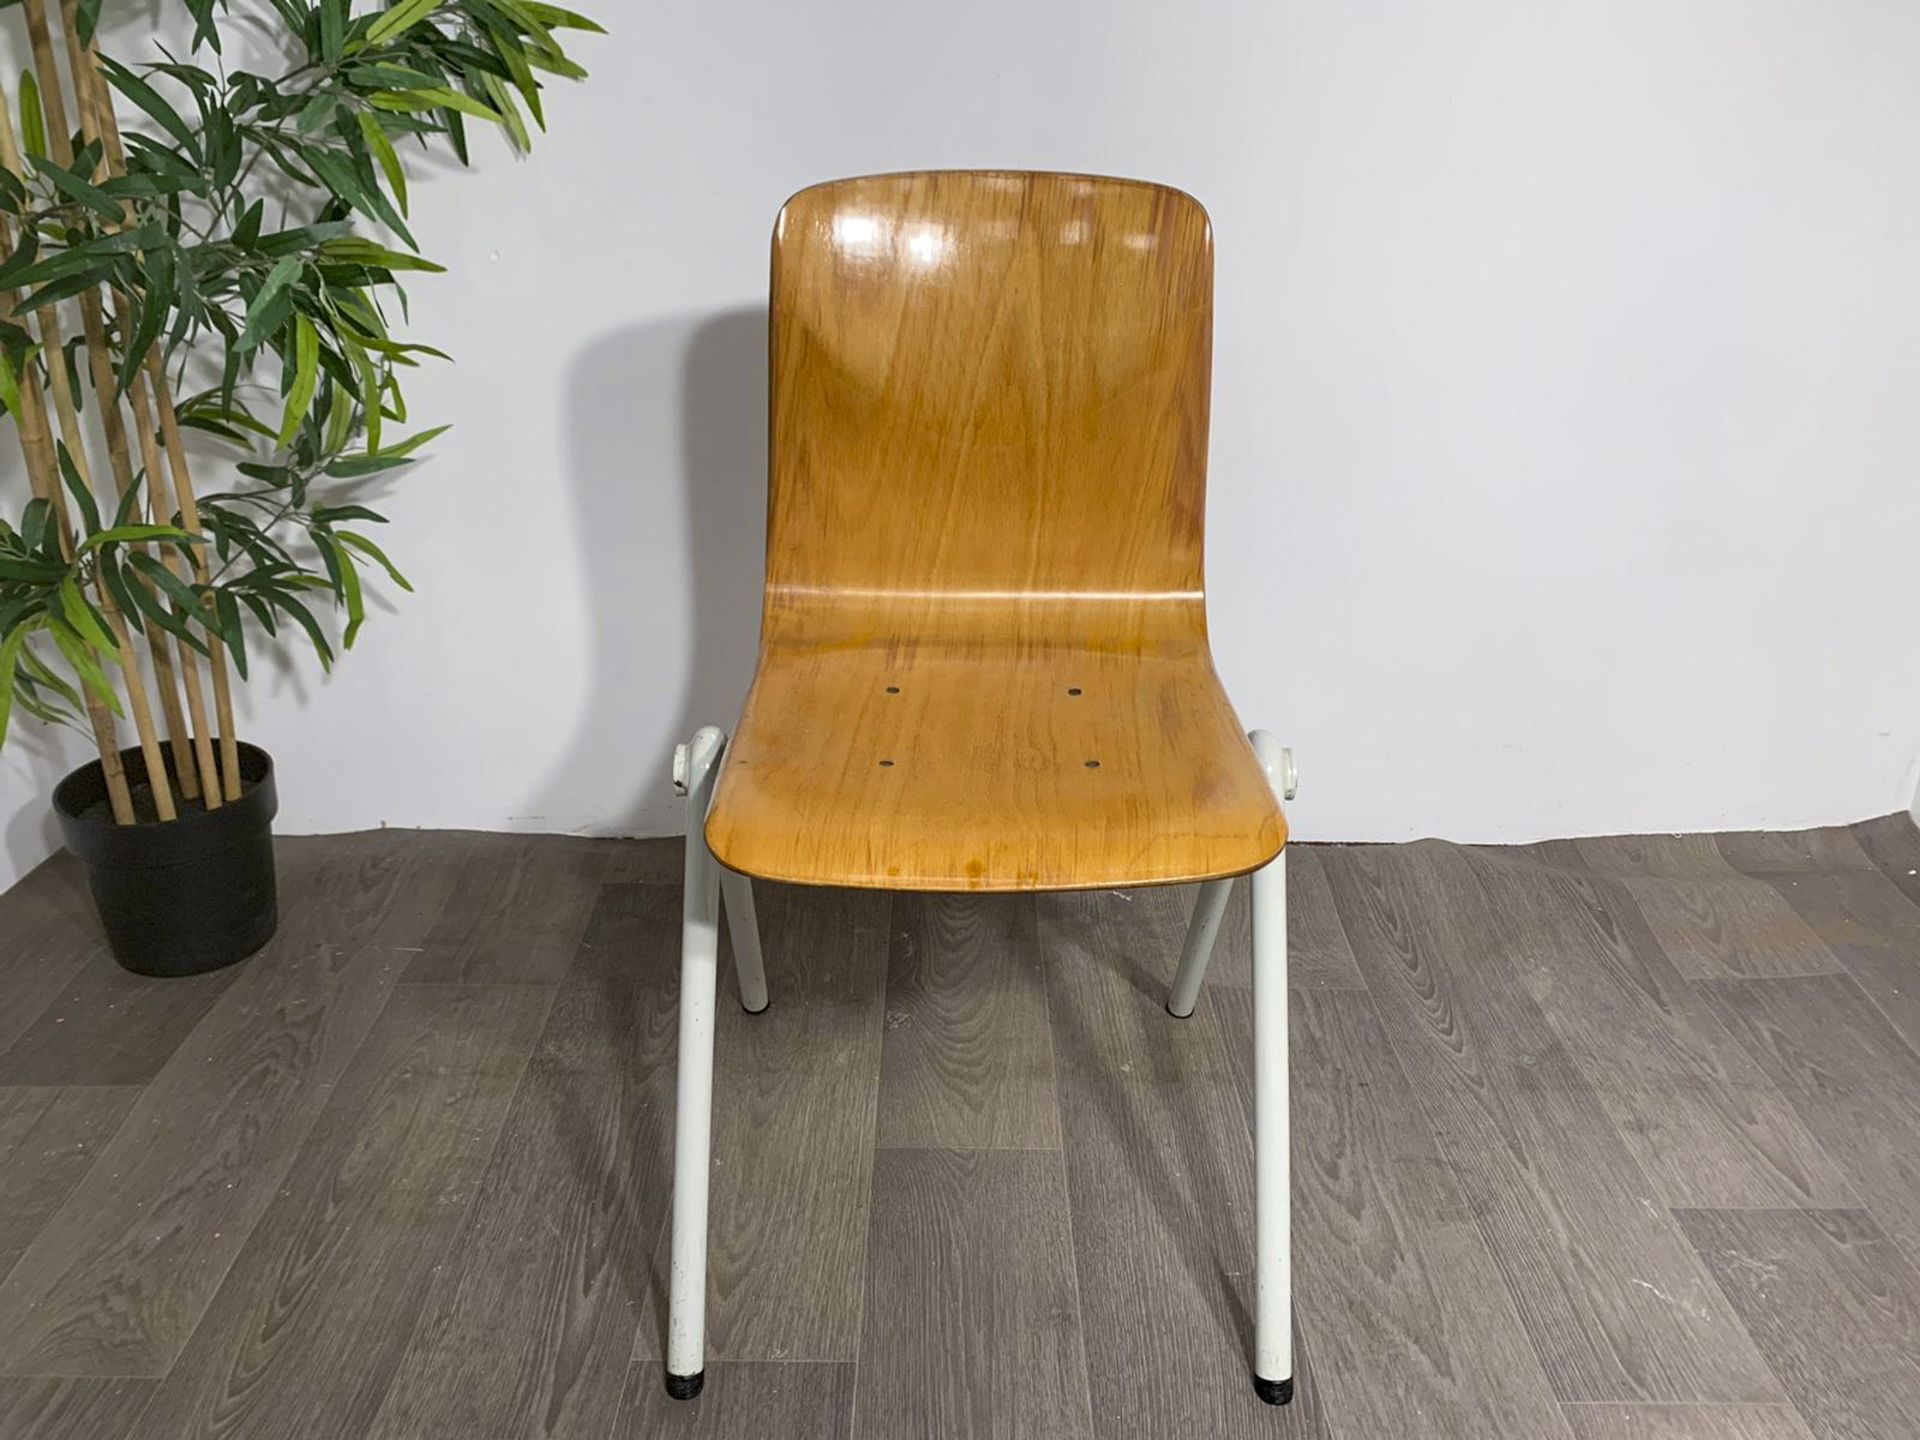 Mid Century Wooden Chair with Steel Legs - Image 7 of 9